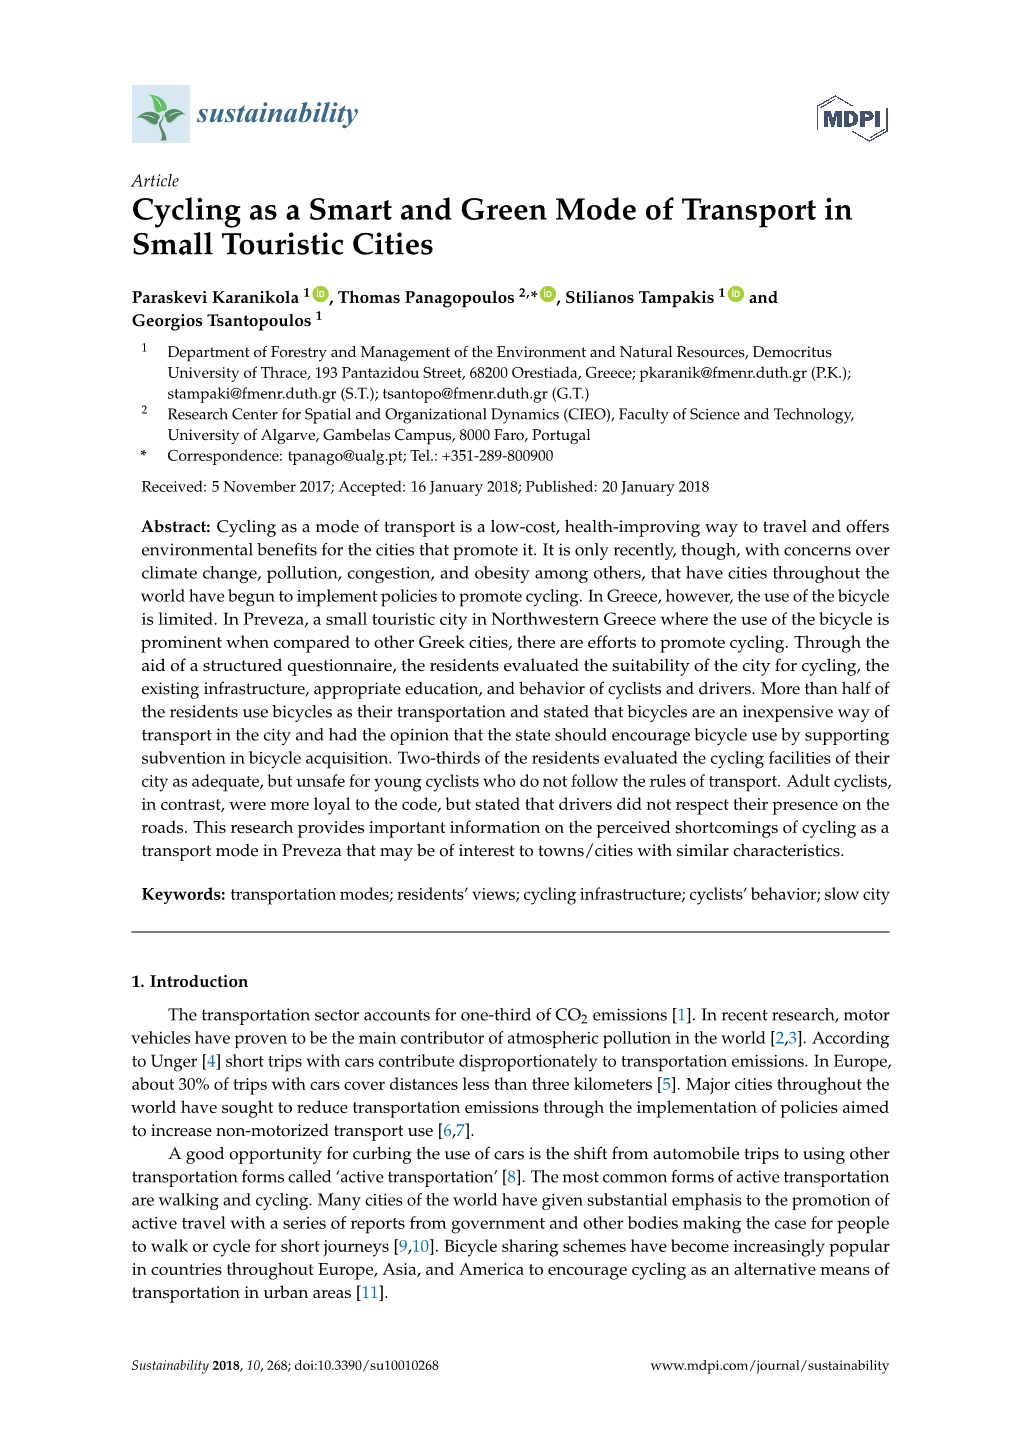 Cycling As a Smart and Green Mode of Transport in Small Touristic Cities